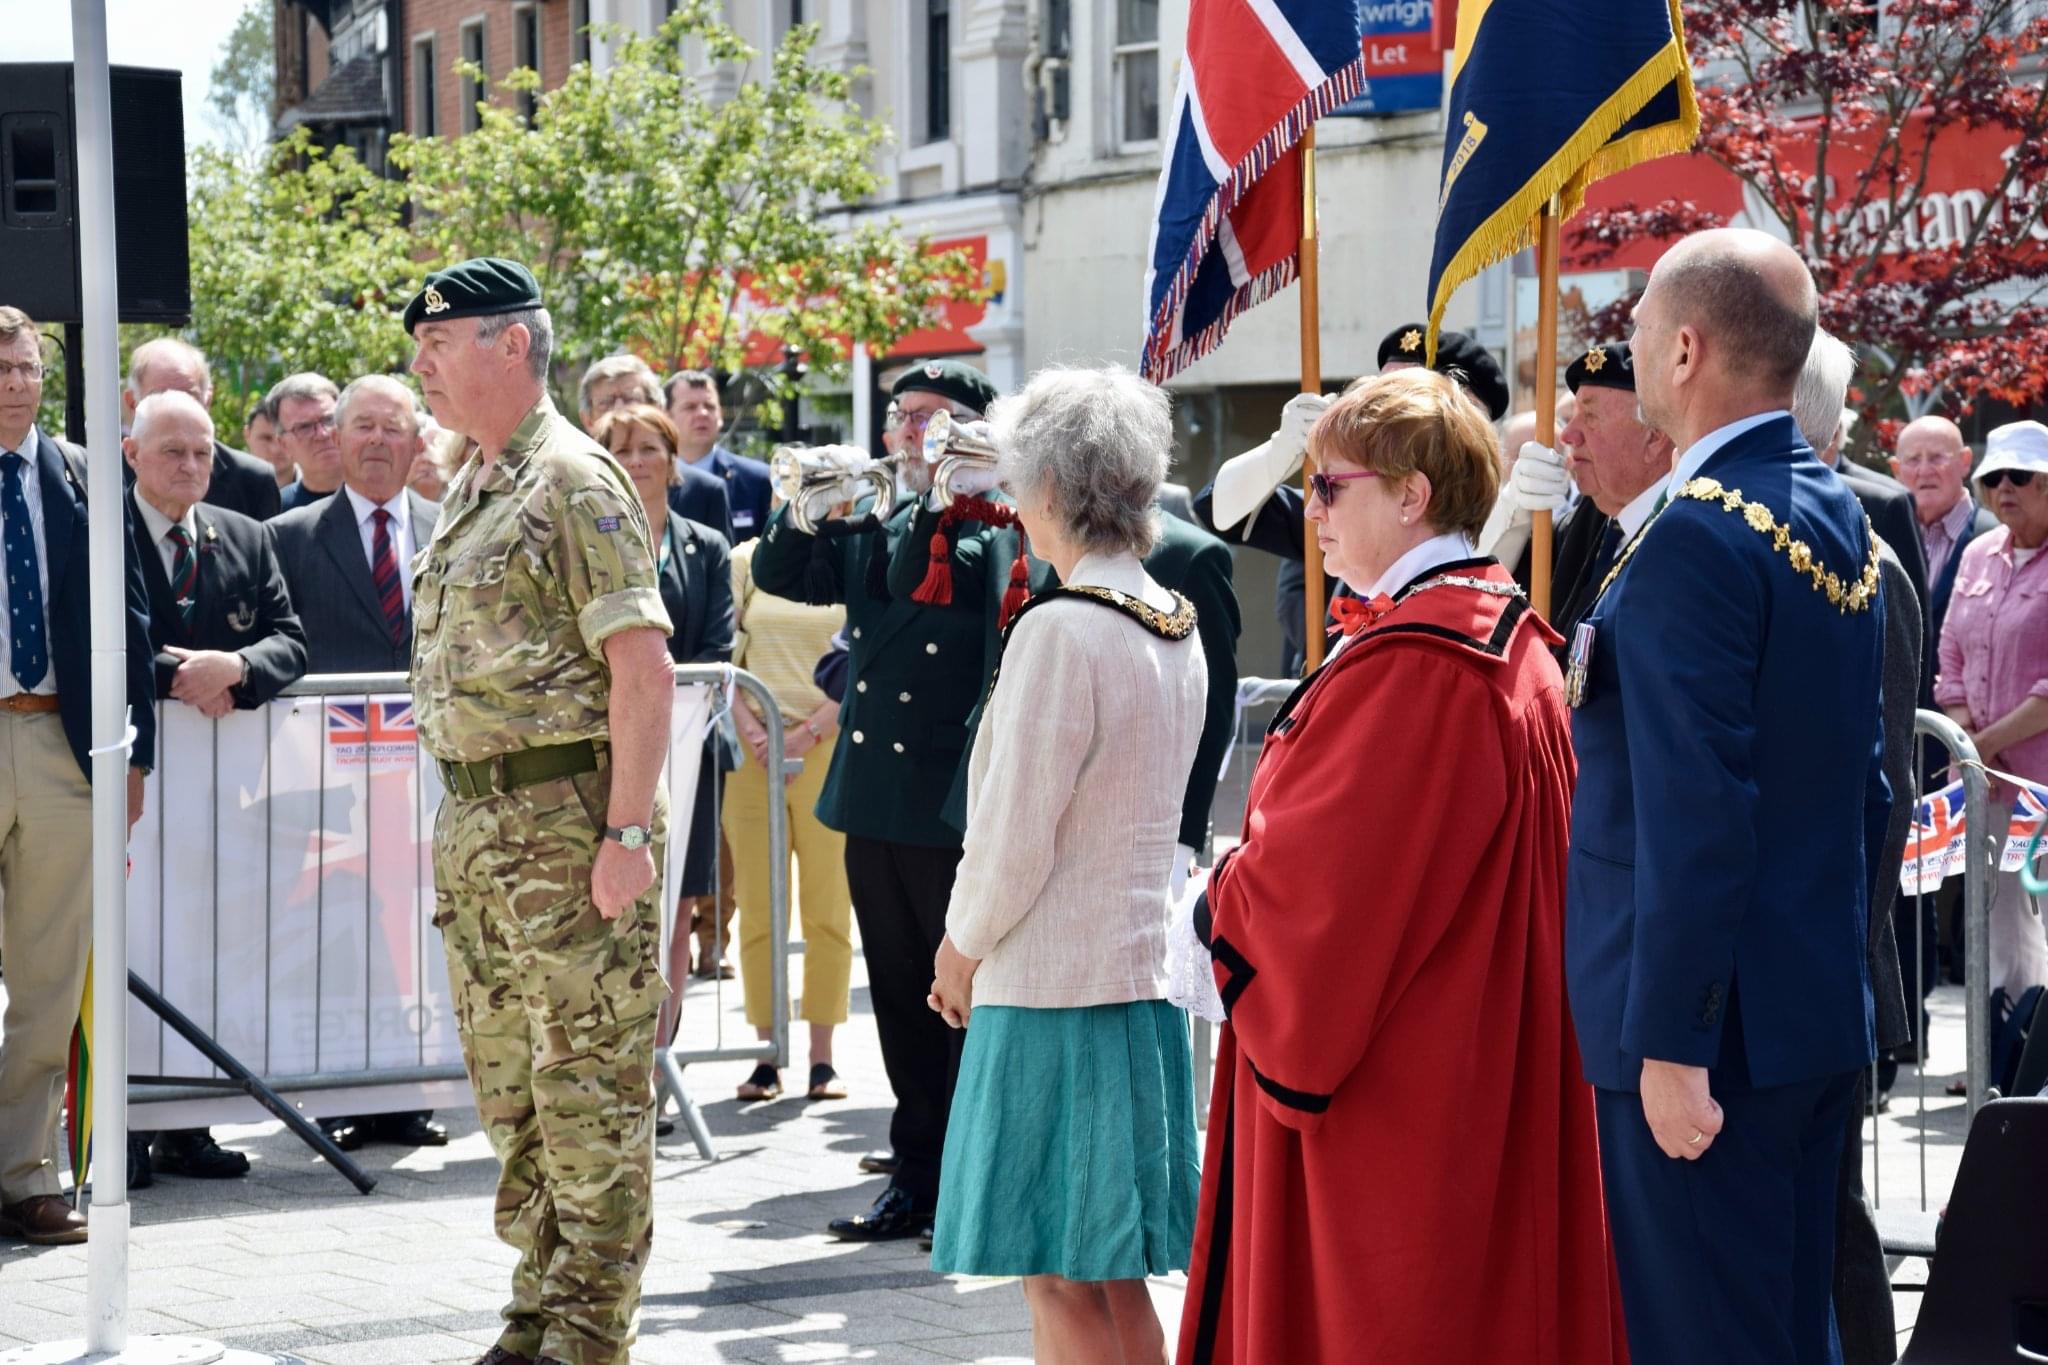 NEWS | The Mayor of Hereford attended the raising of the flag to mark the beginning of Armed Forces Week 2022 in Hereford earlier this week